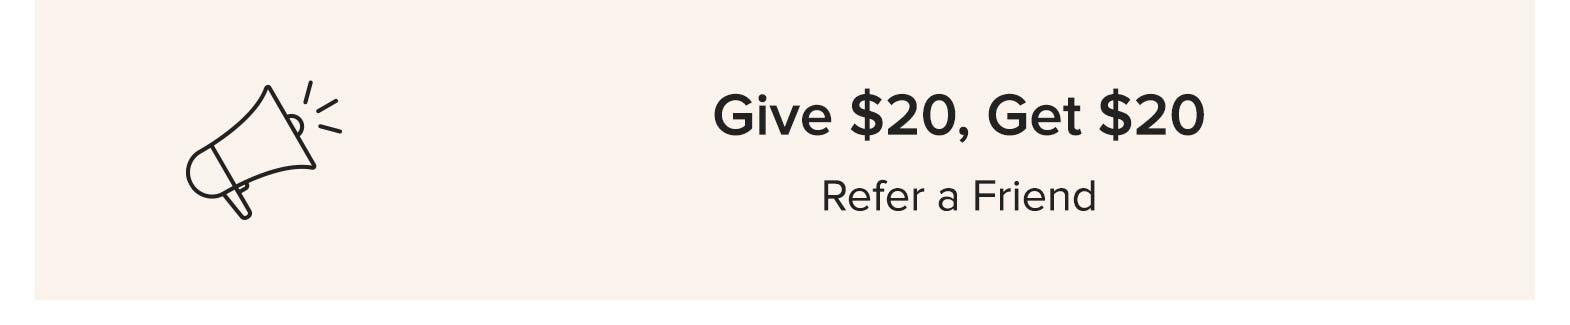 Give $20, Get $20 refer a friend